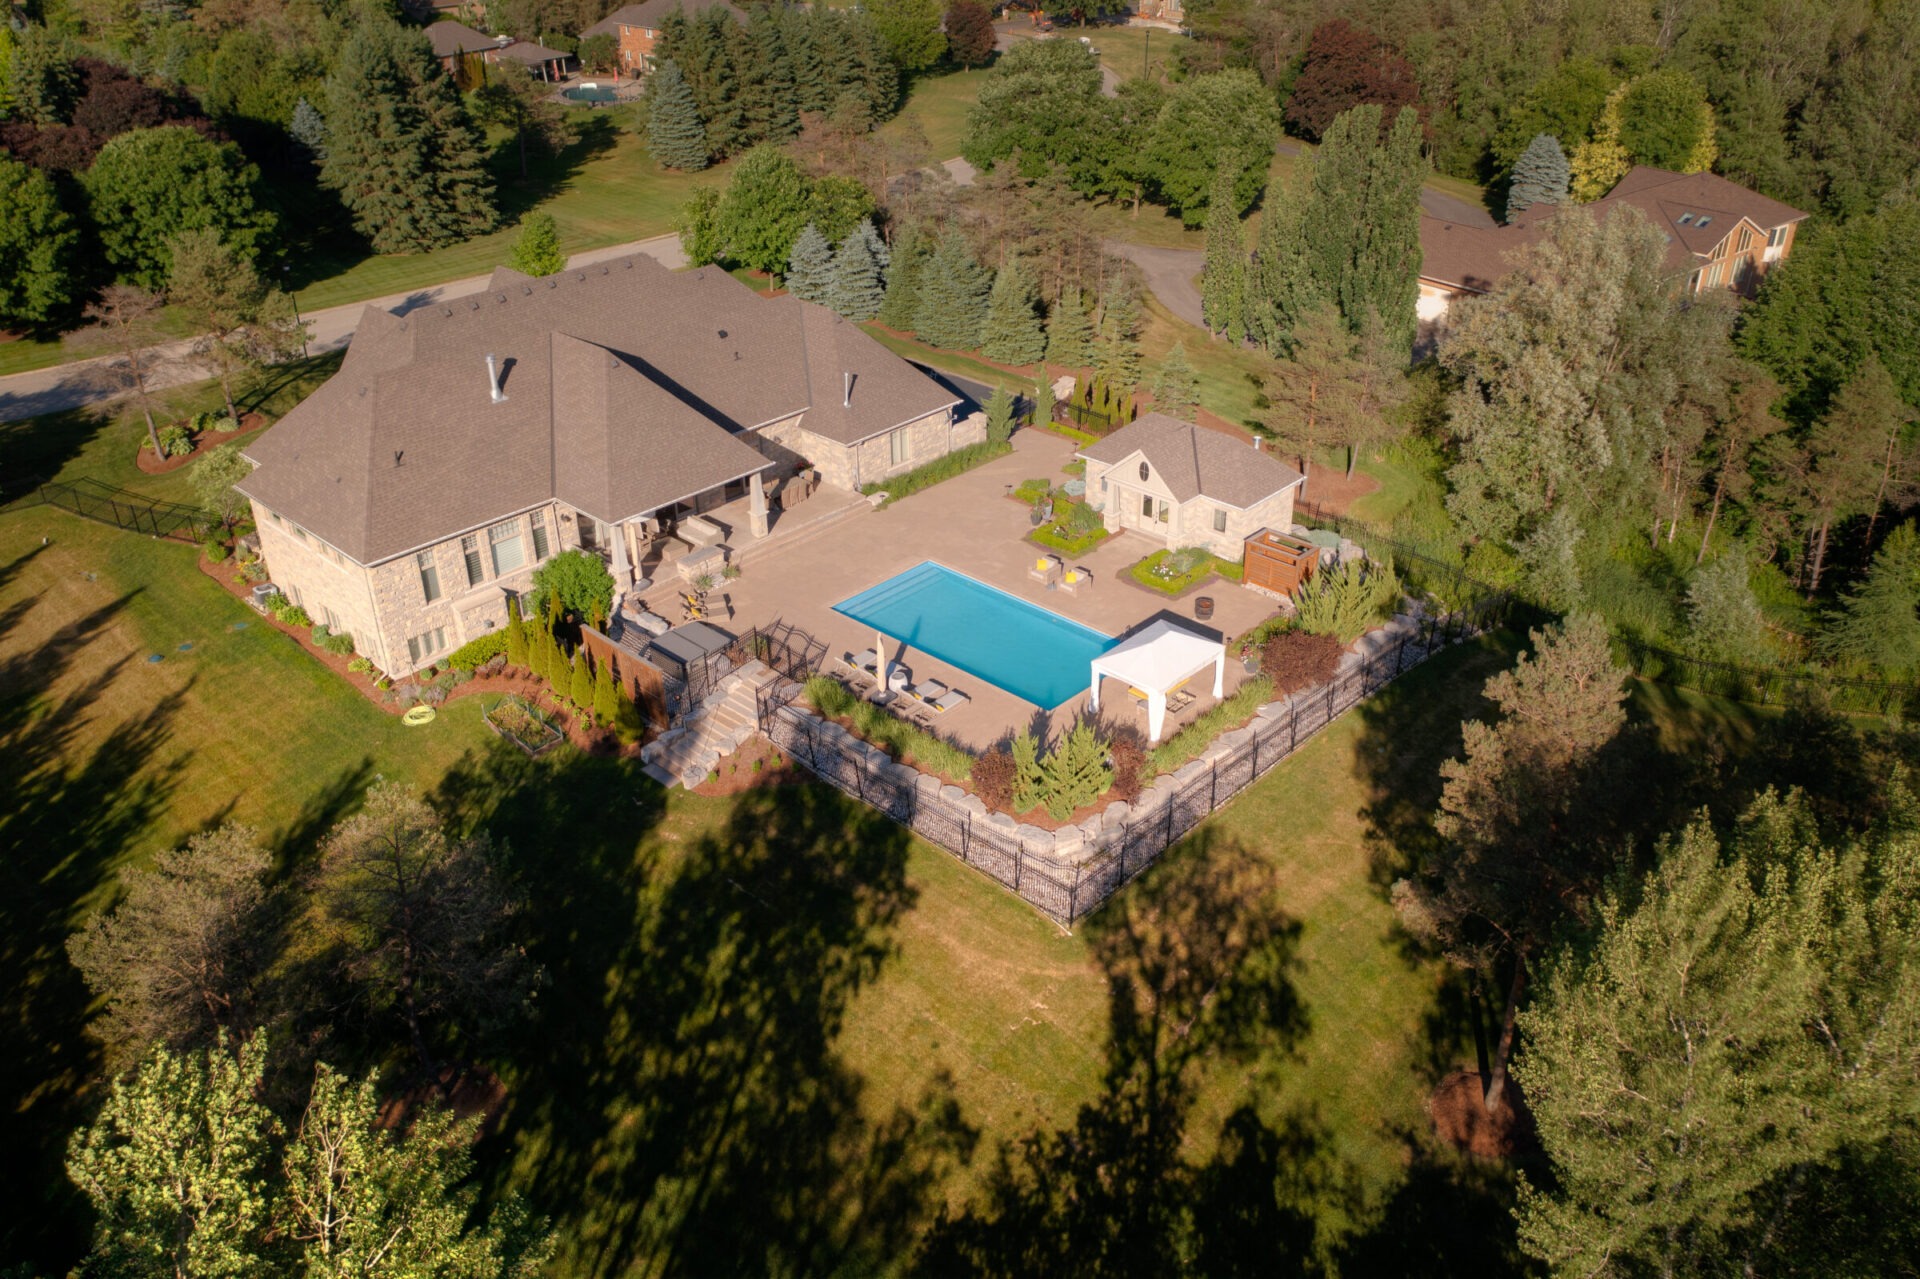 An aerial view of a large estate featuring a stone house with a swimming pool, landscaped gardens, and surrounded by lush greenery and trees.